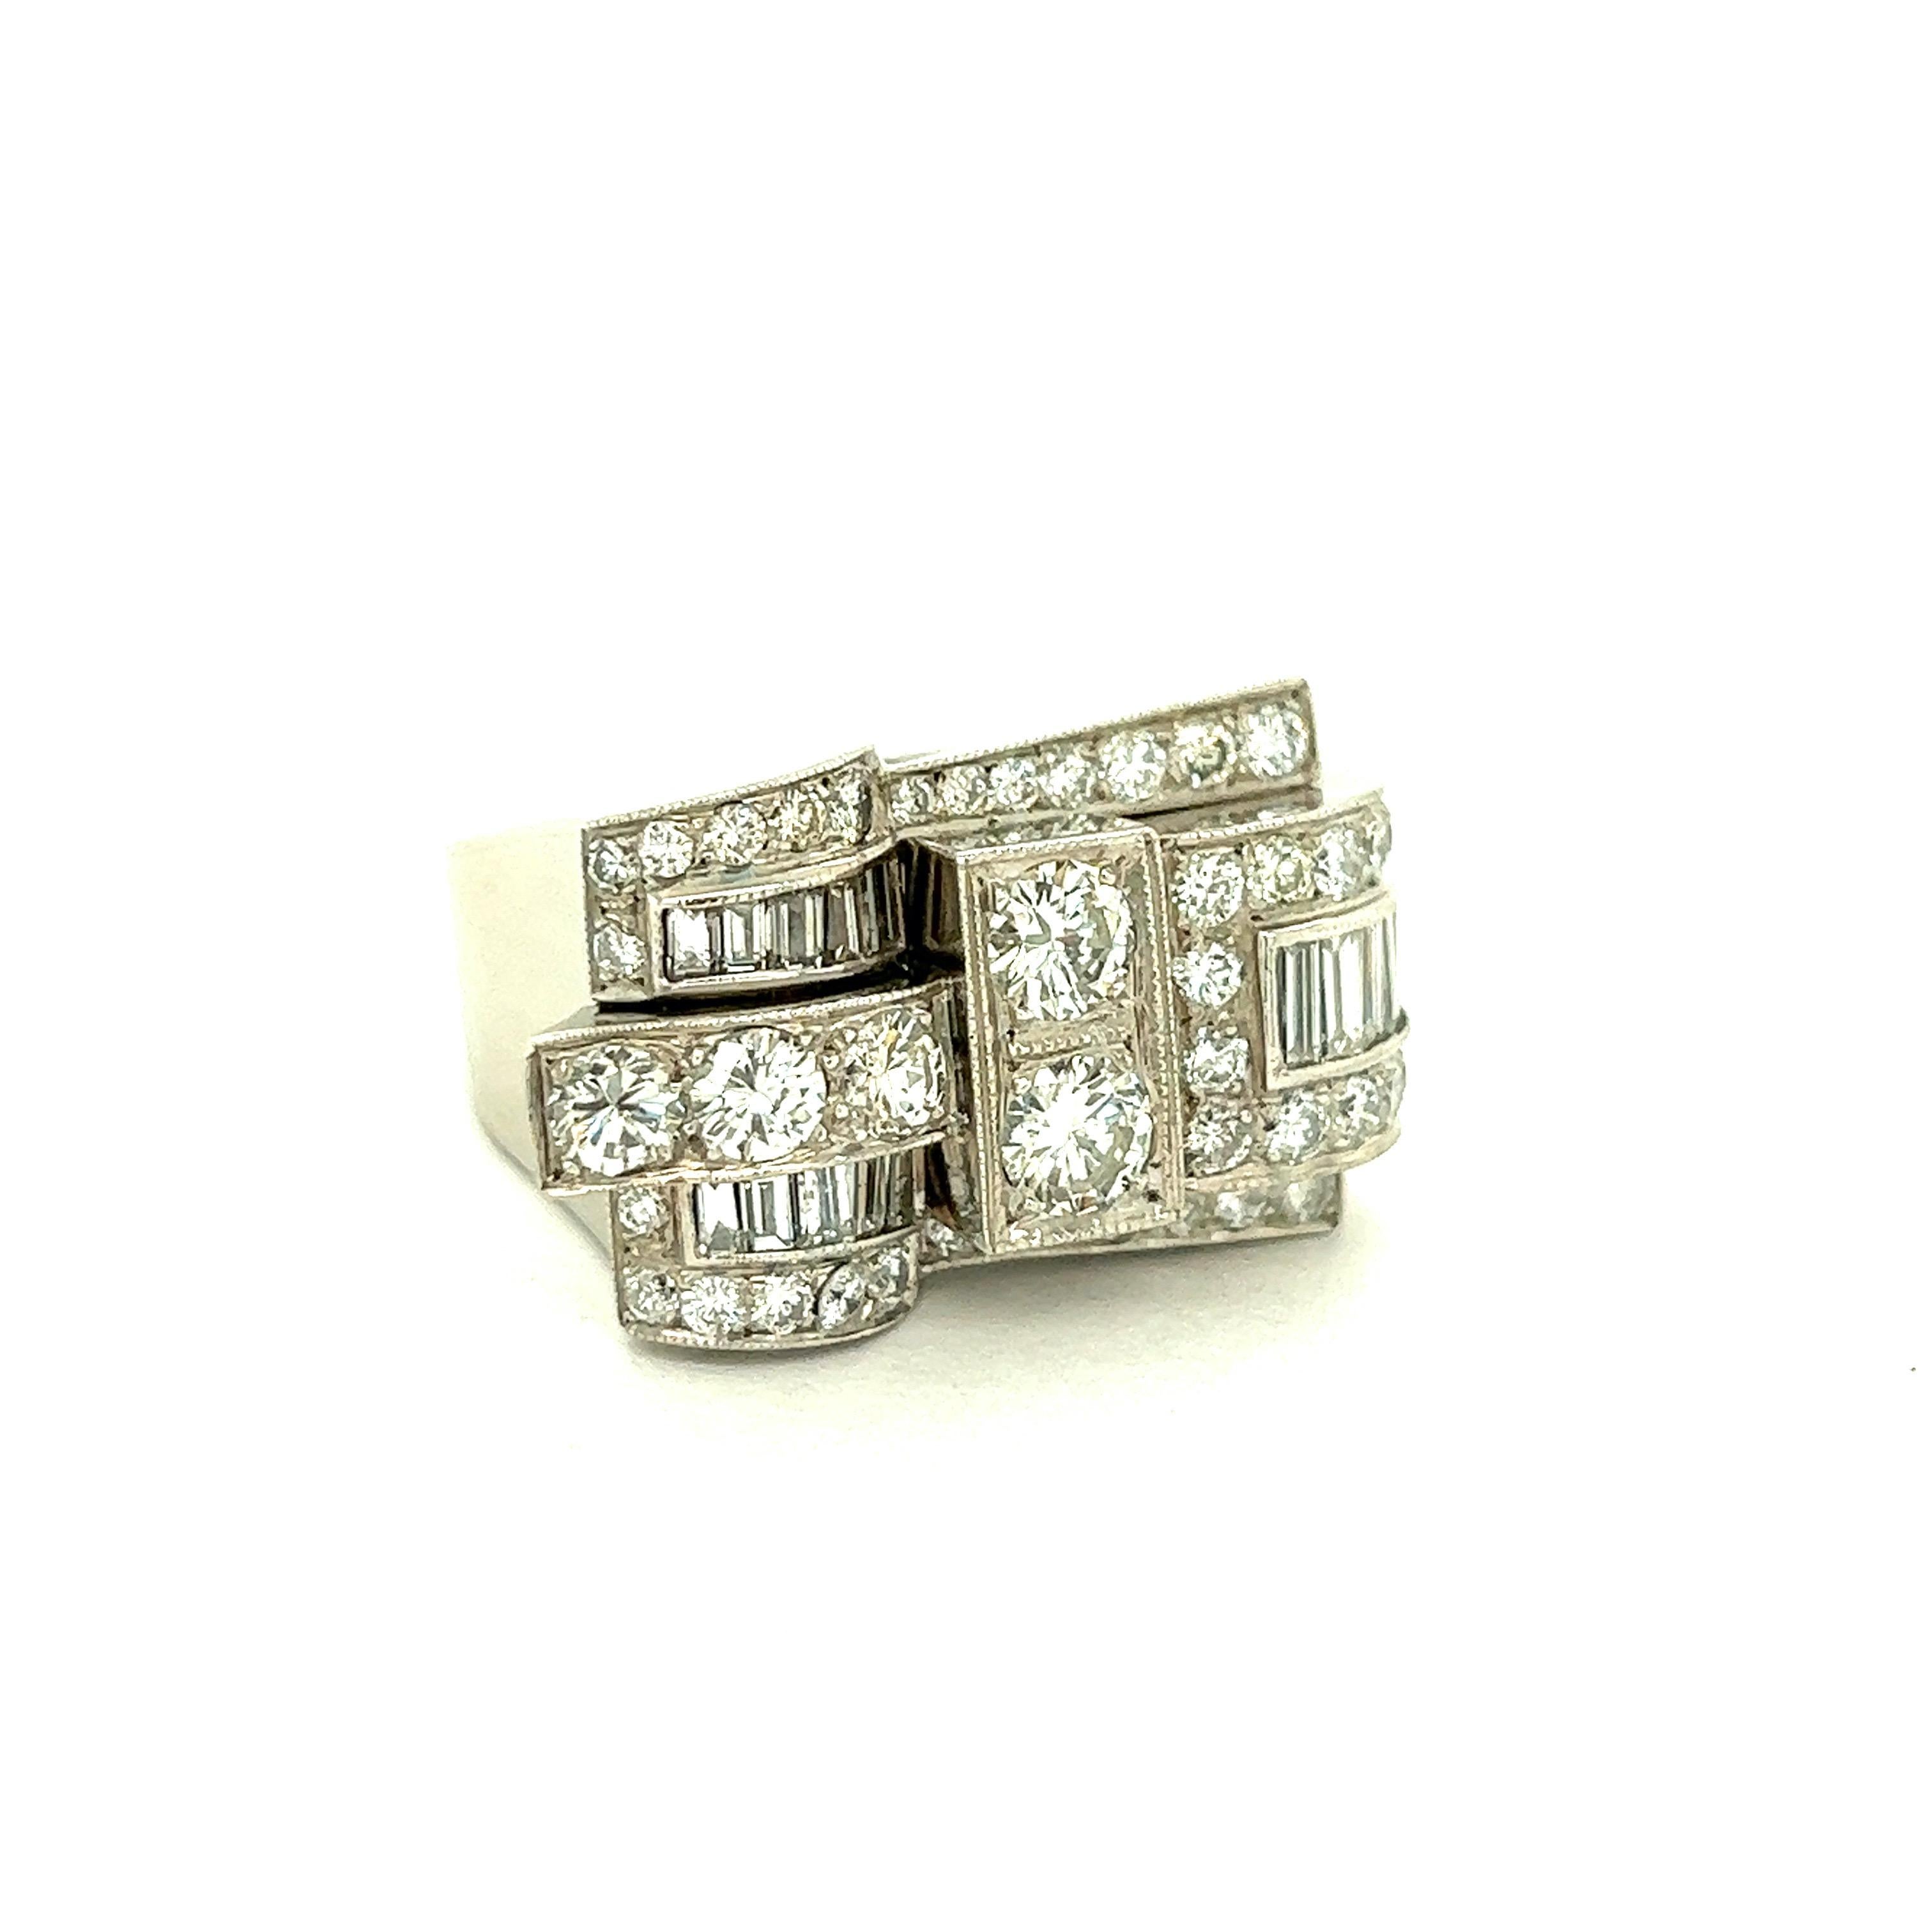 Retro Diamond Platinum Ring

Round- and baguette-cut diamonds of approximately 2.5 carats total, set on platinum metal; marked Plat inside the band

Size: Top width 1.6 cm, length 2.6 cm; 9.25 US
Total weight: 15.8 grams